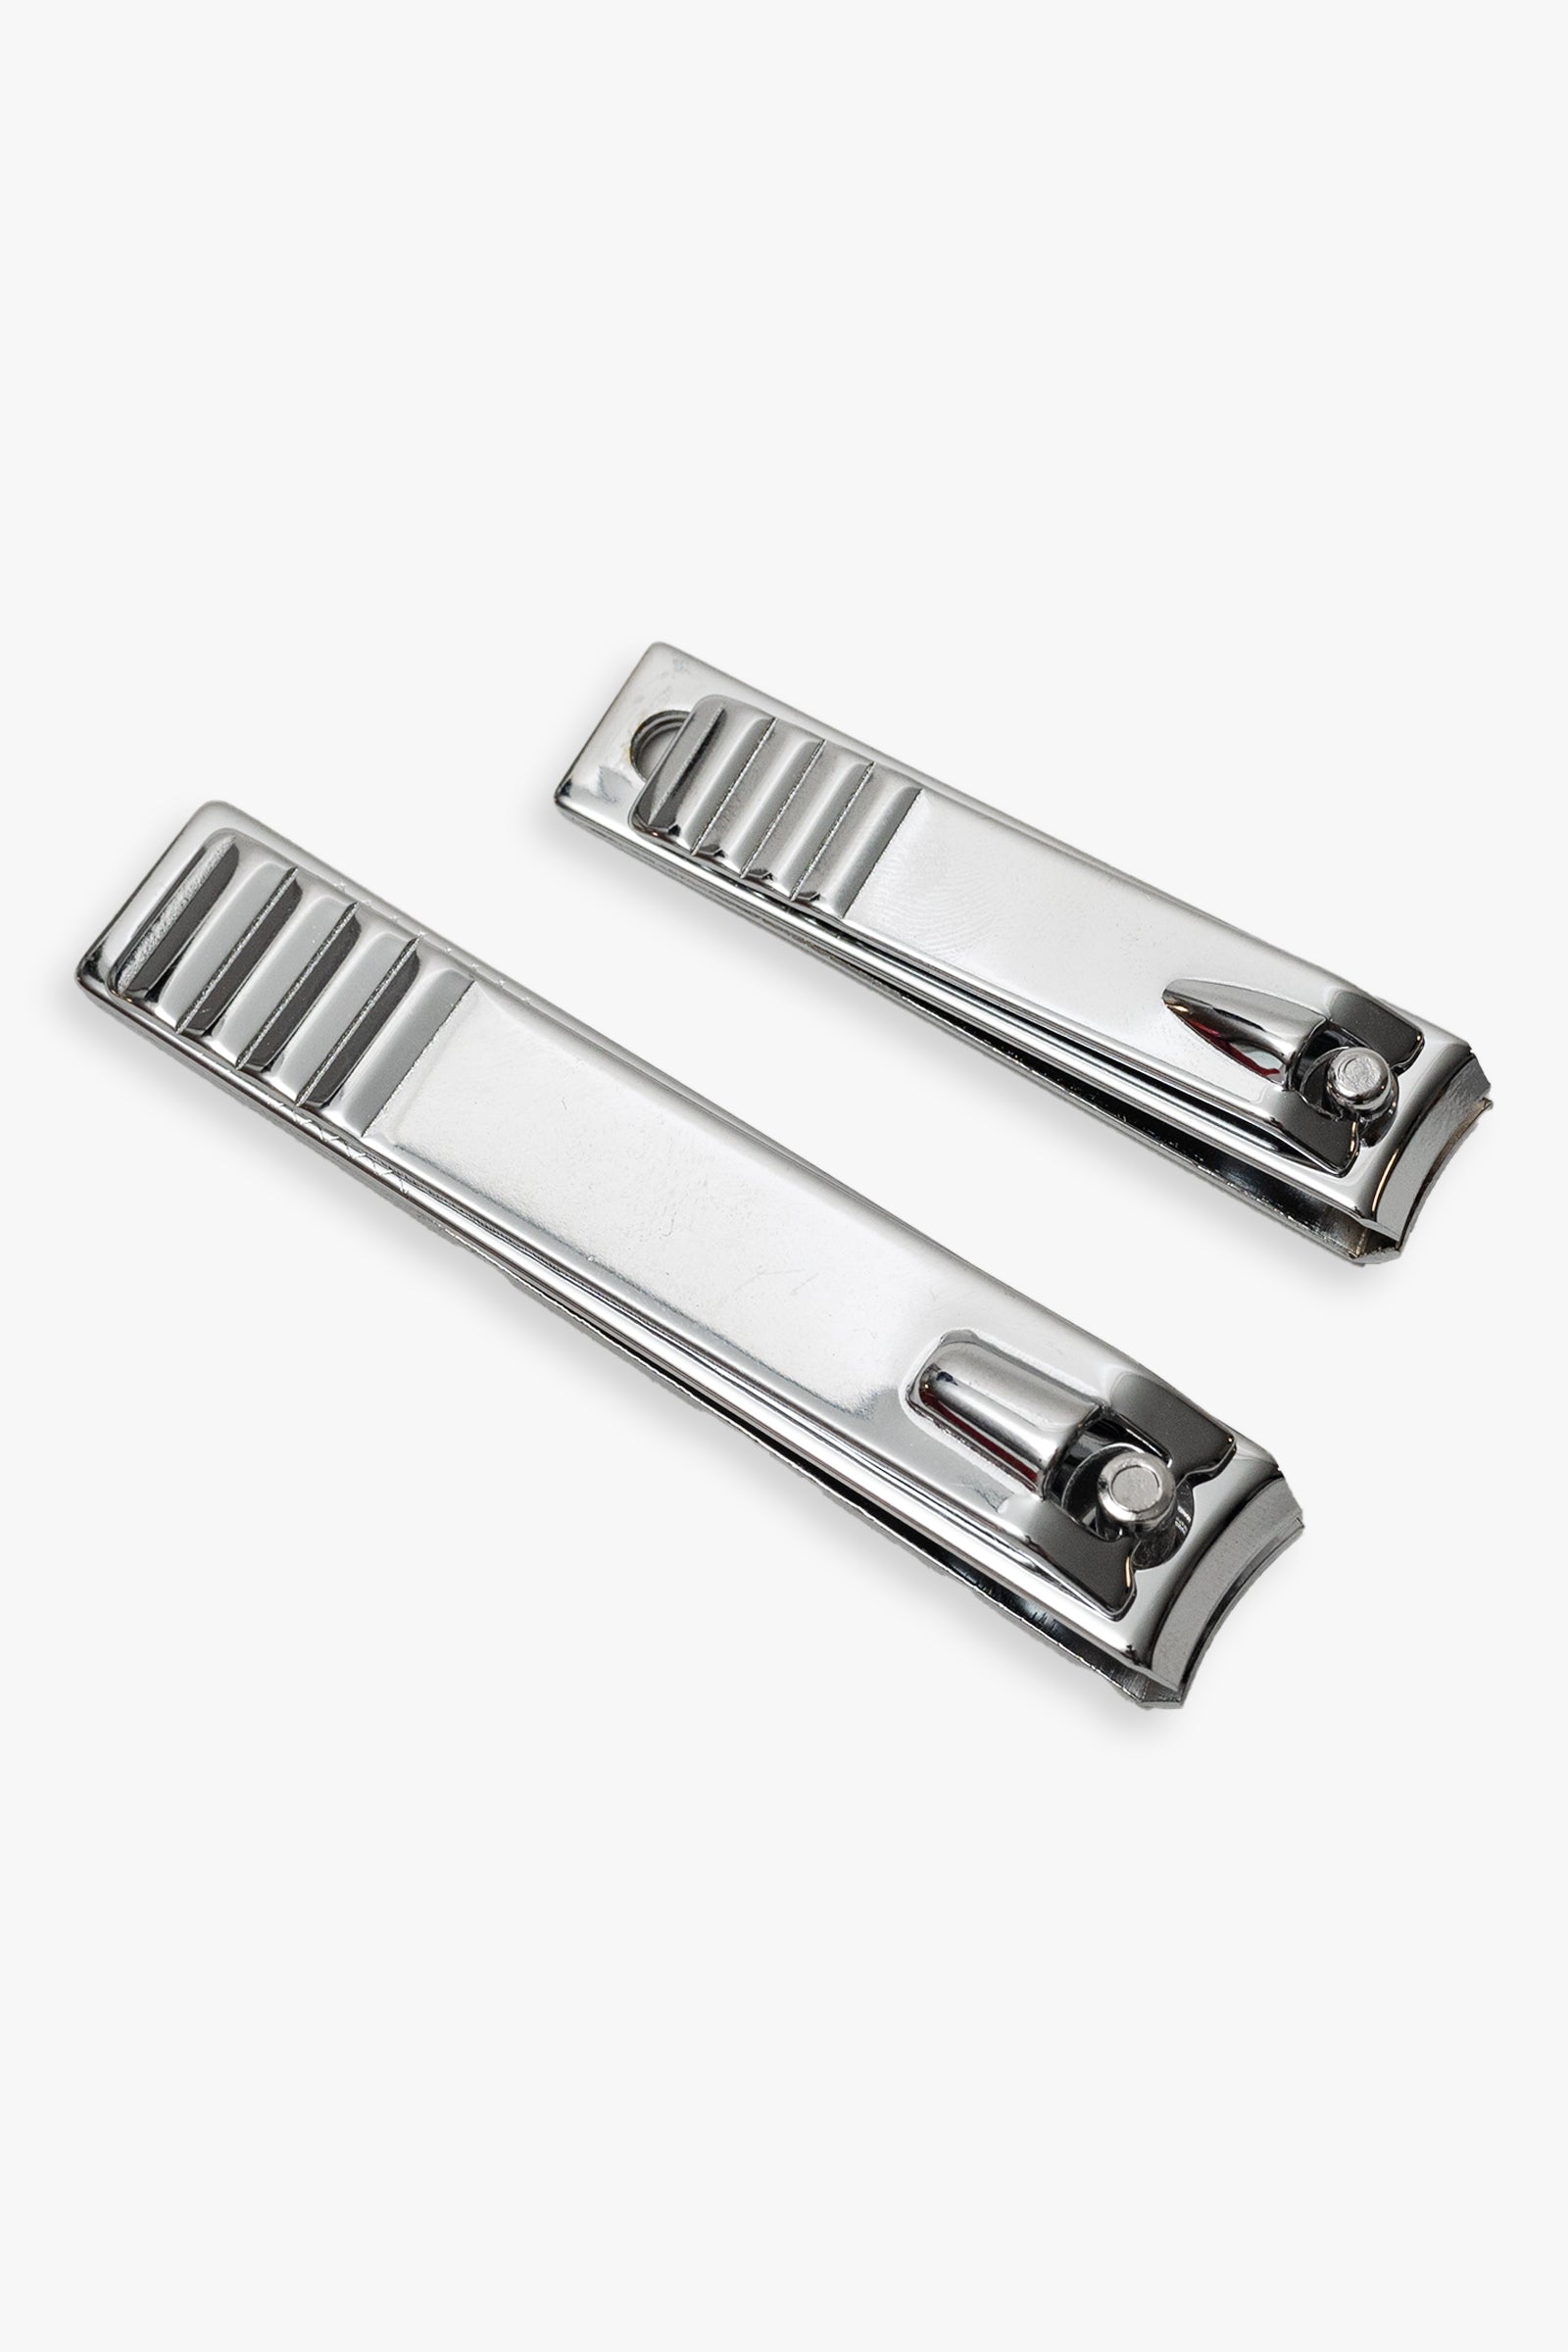 2-Pack Nail Manicure & Pedicure Clippers